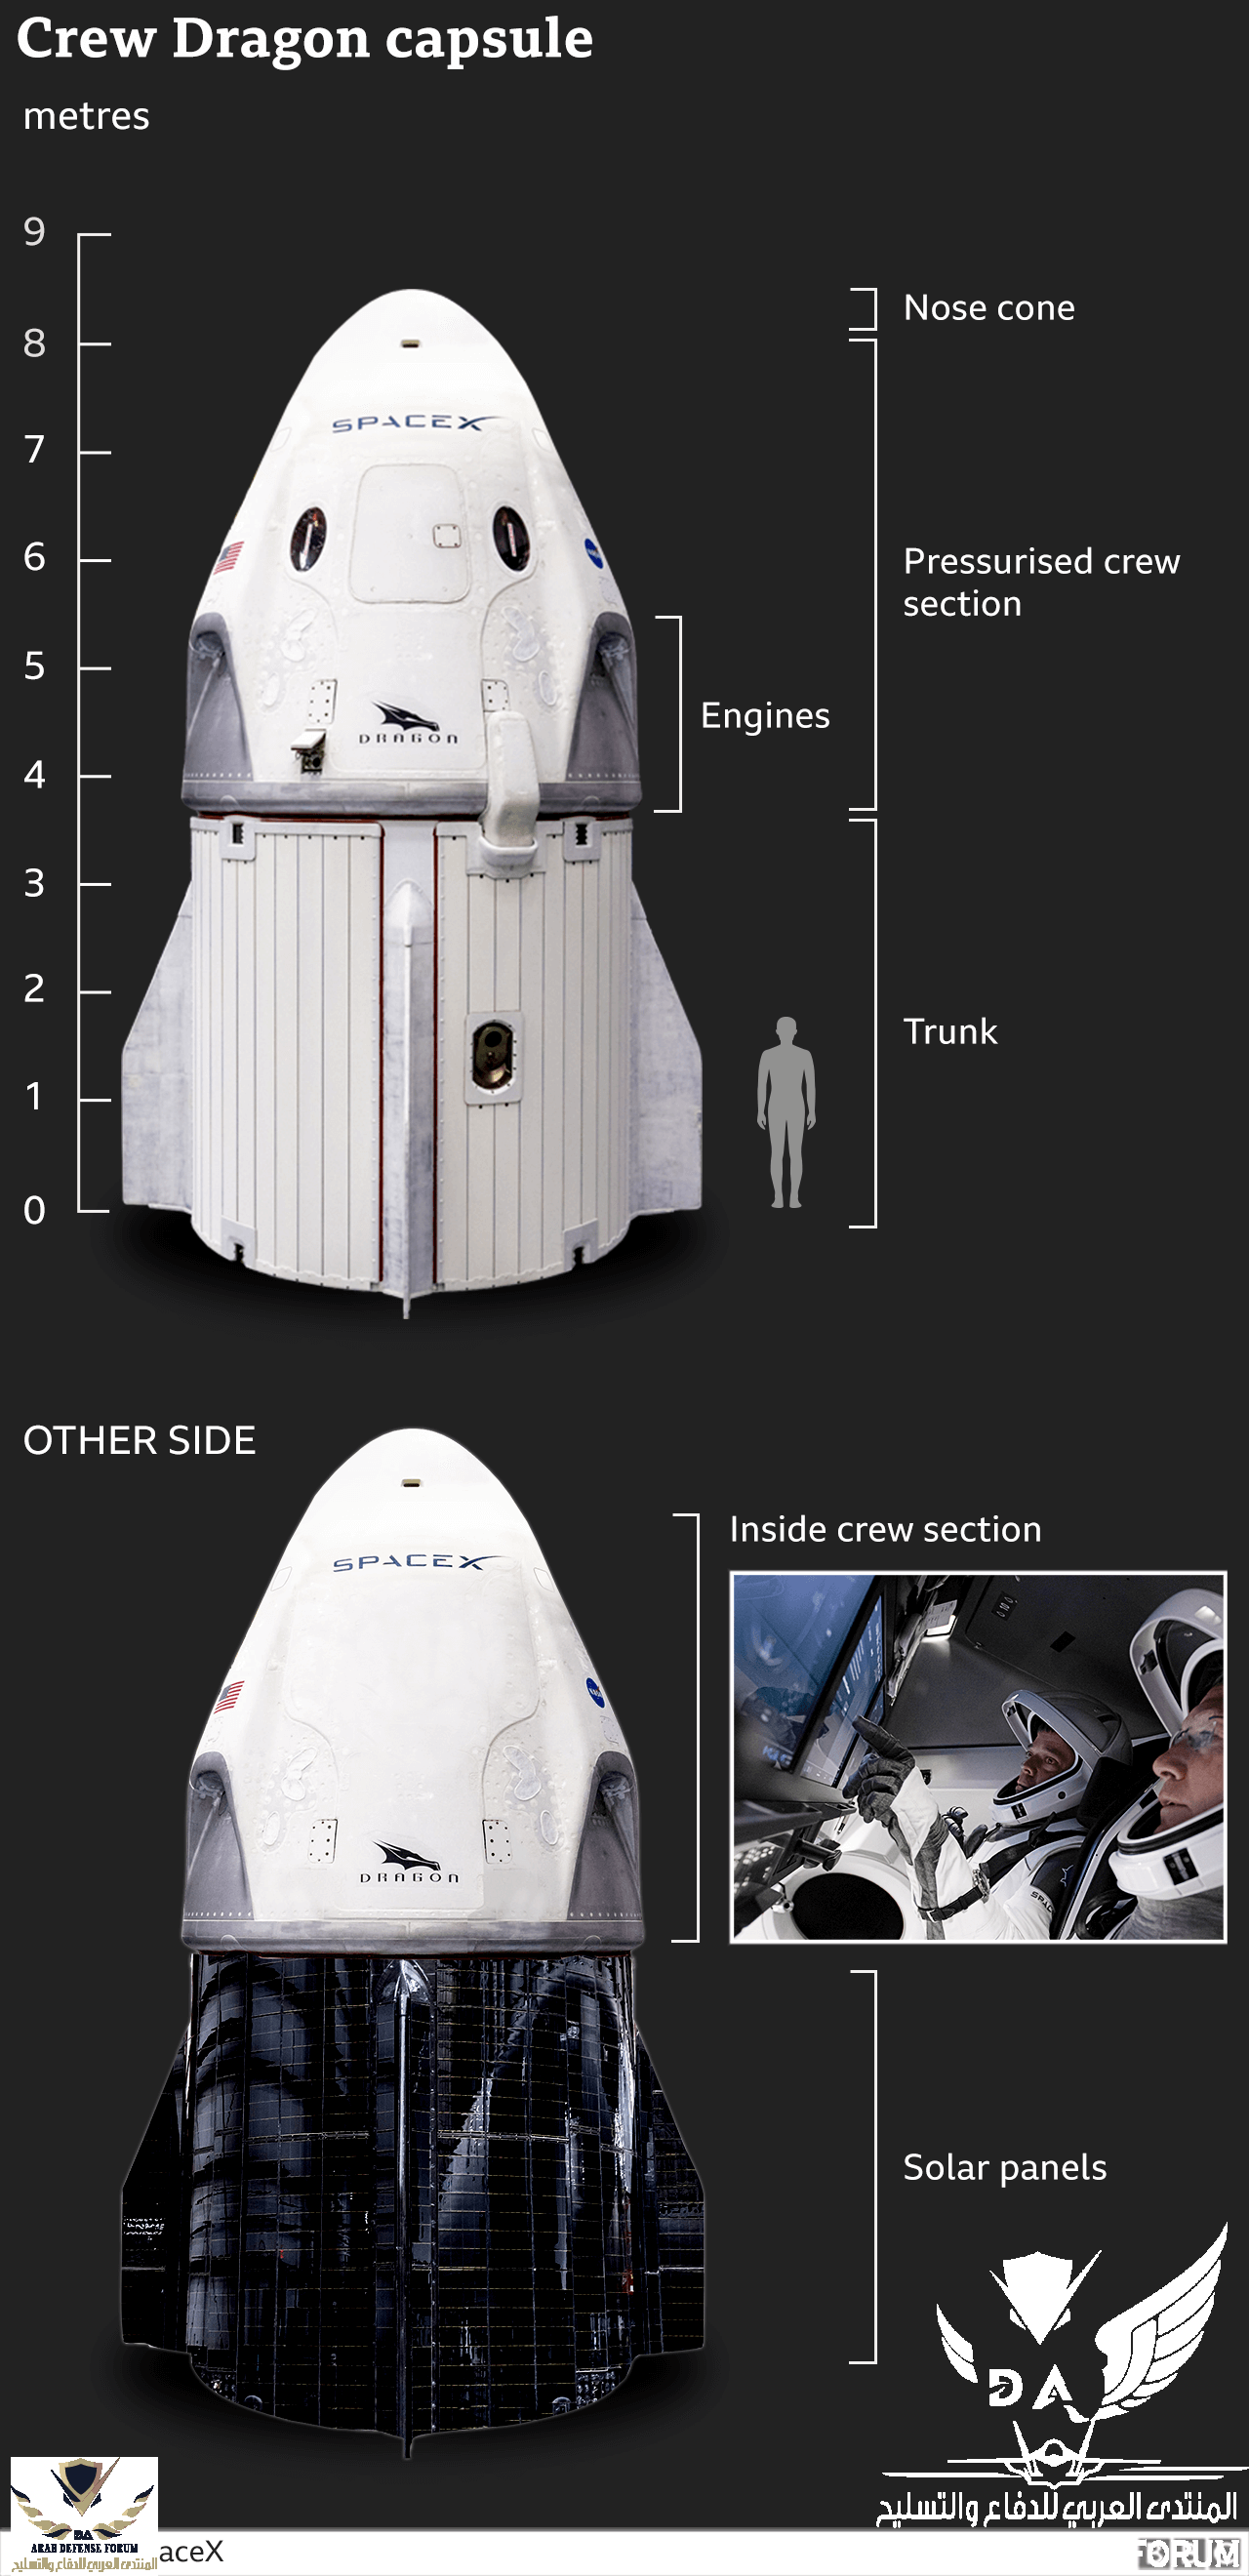 _112424554_space_x_dragon_capsule_inf640-2x-nc.png